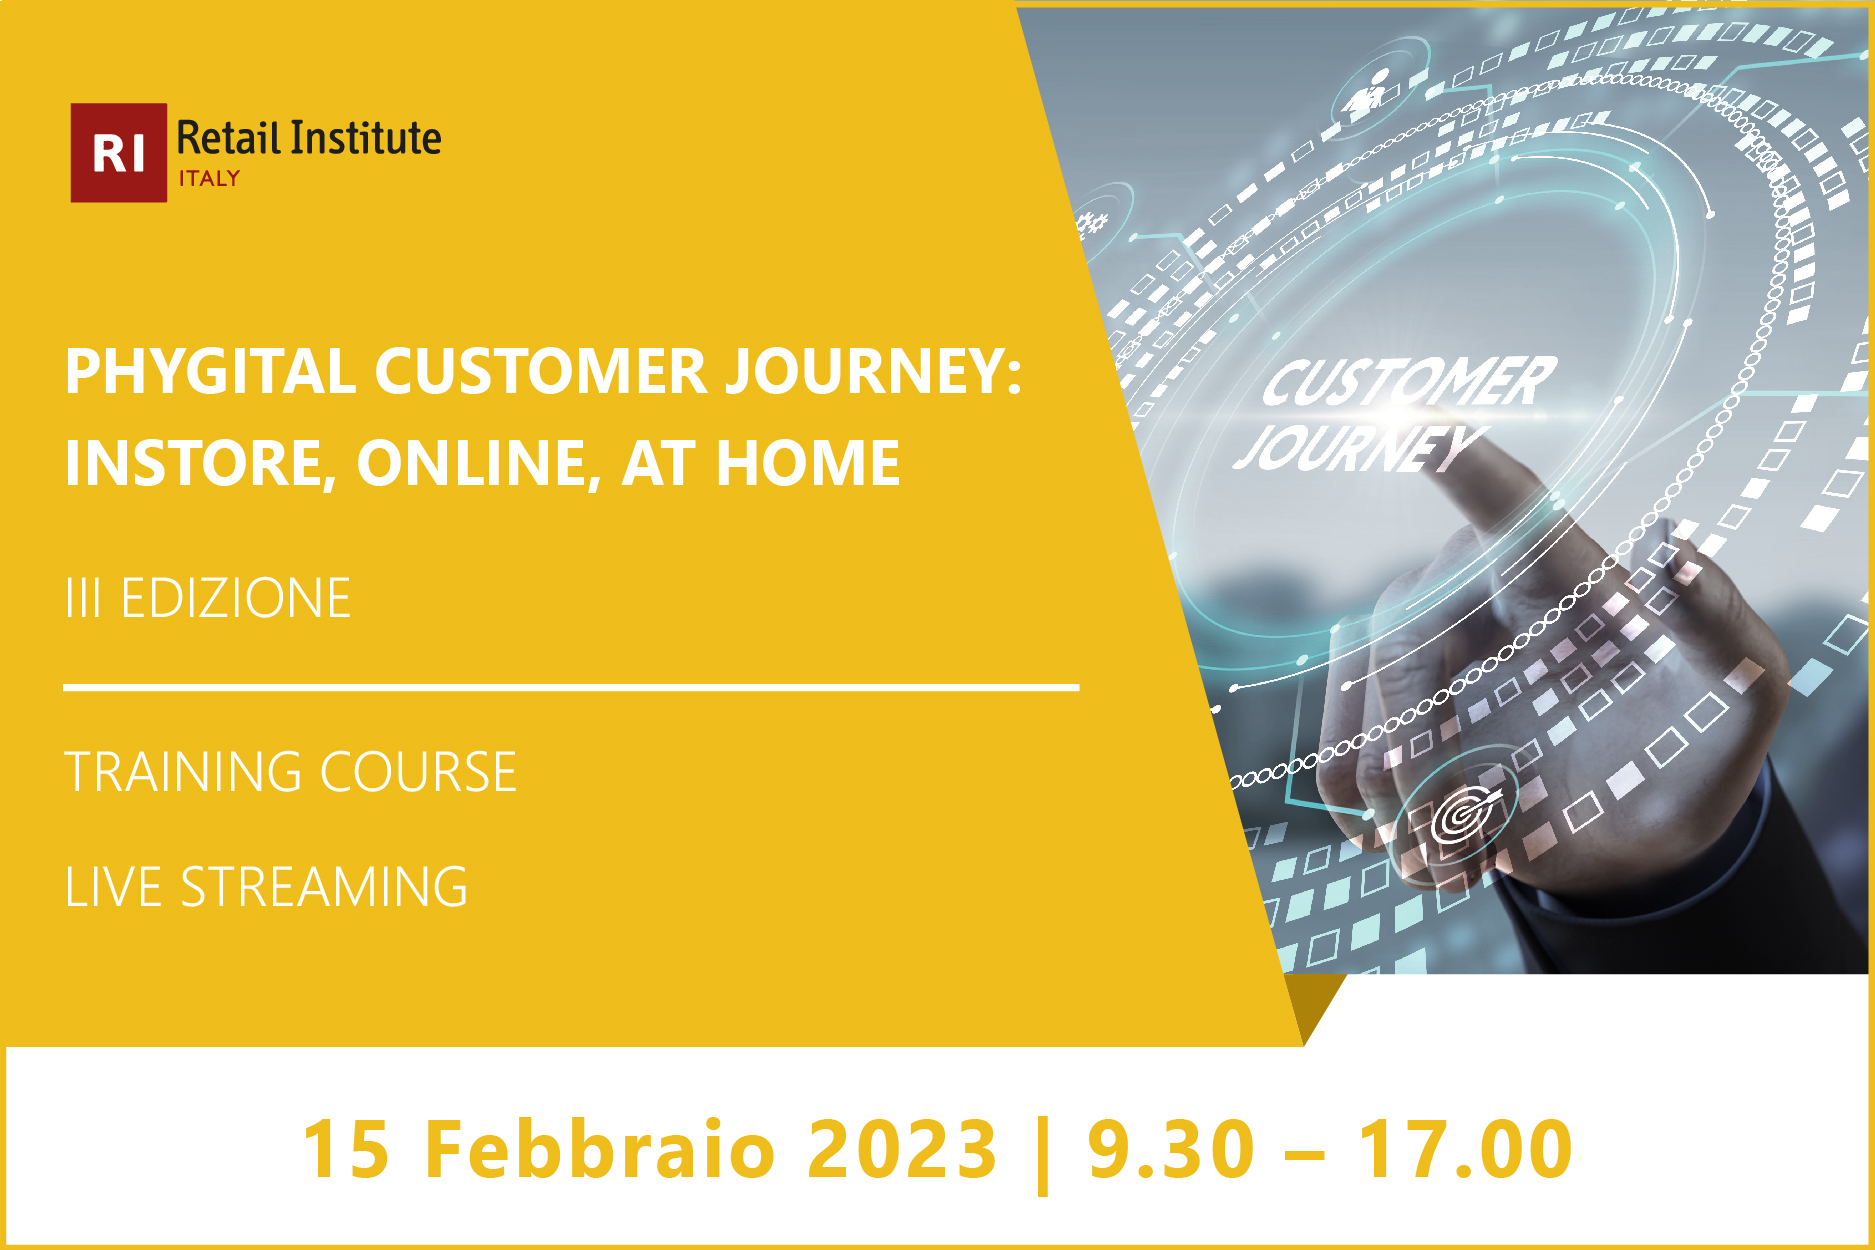 Training Course “Phygital Customer Journey: instore, online, at home” – 15 febbraio 2023